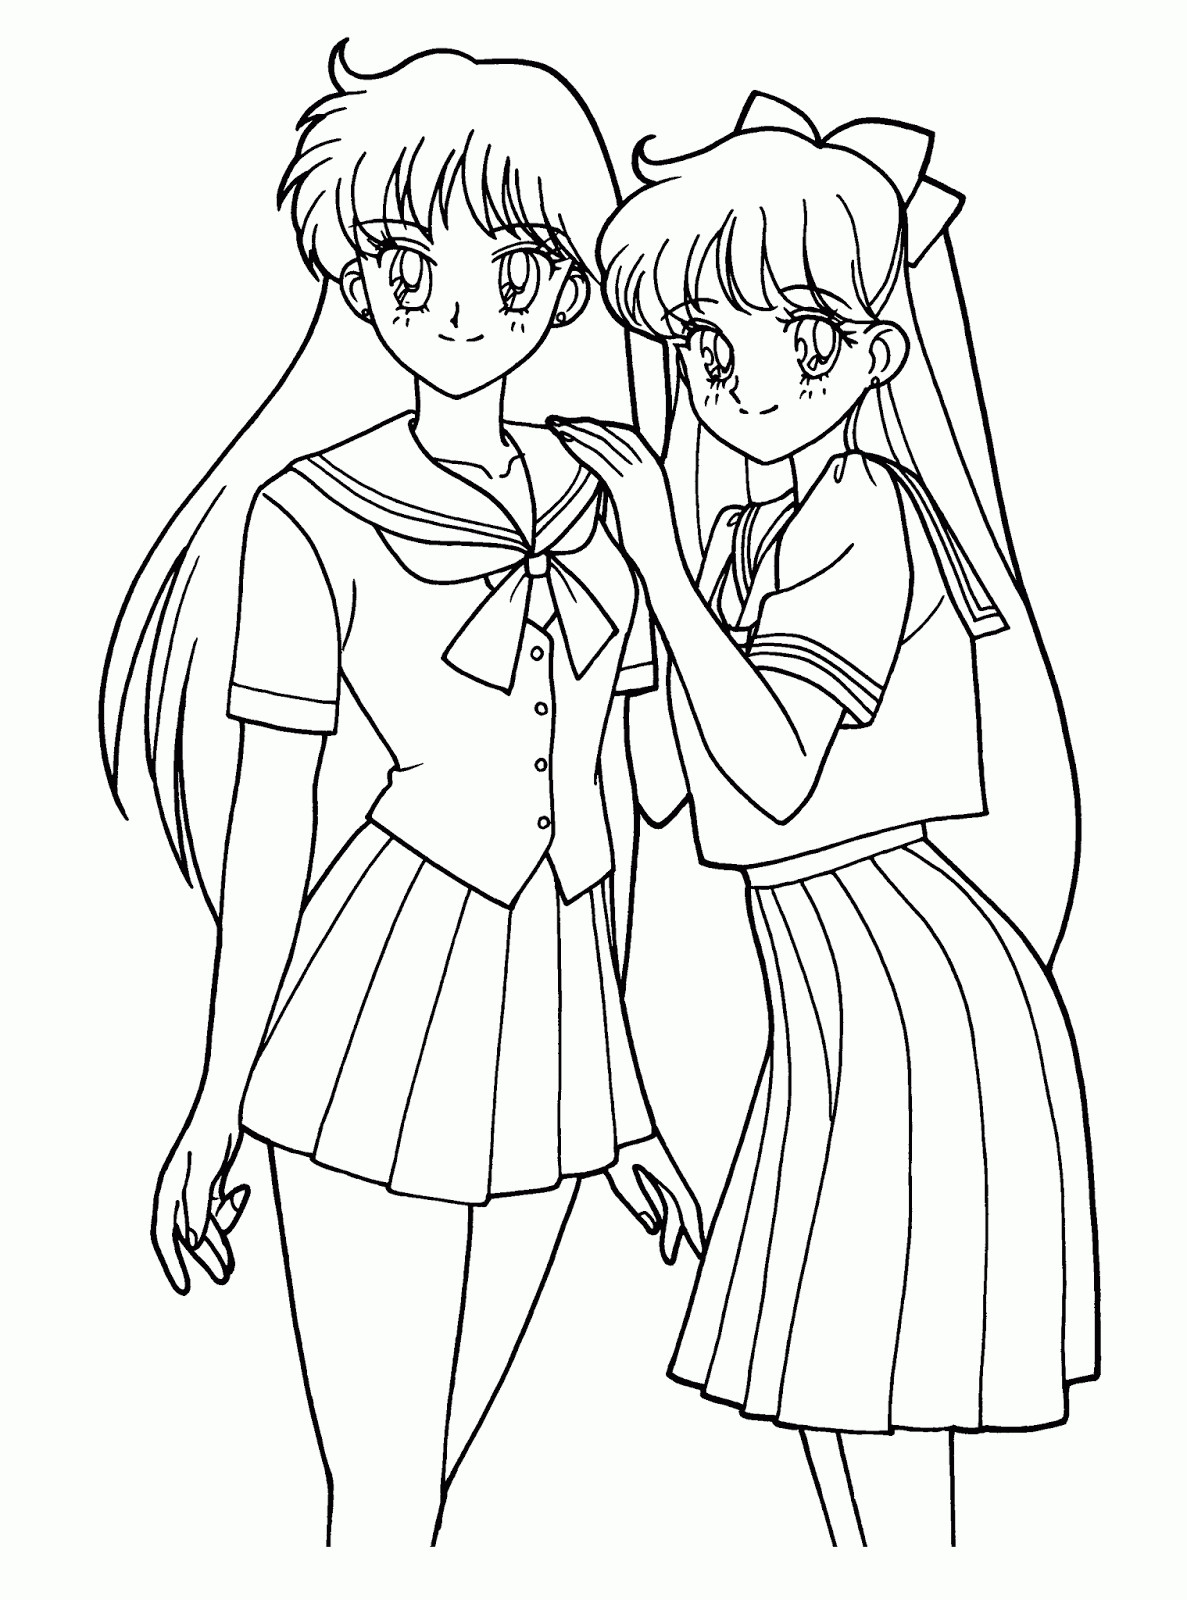 Anime Girl And Boy Coloring Pages
 Anime Coloring Pages Best Coloring Pages For Kids